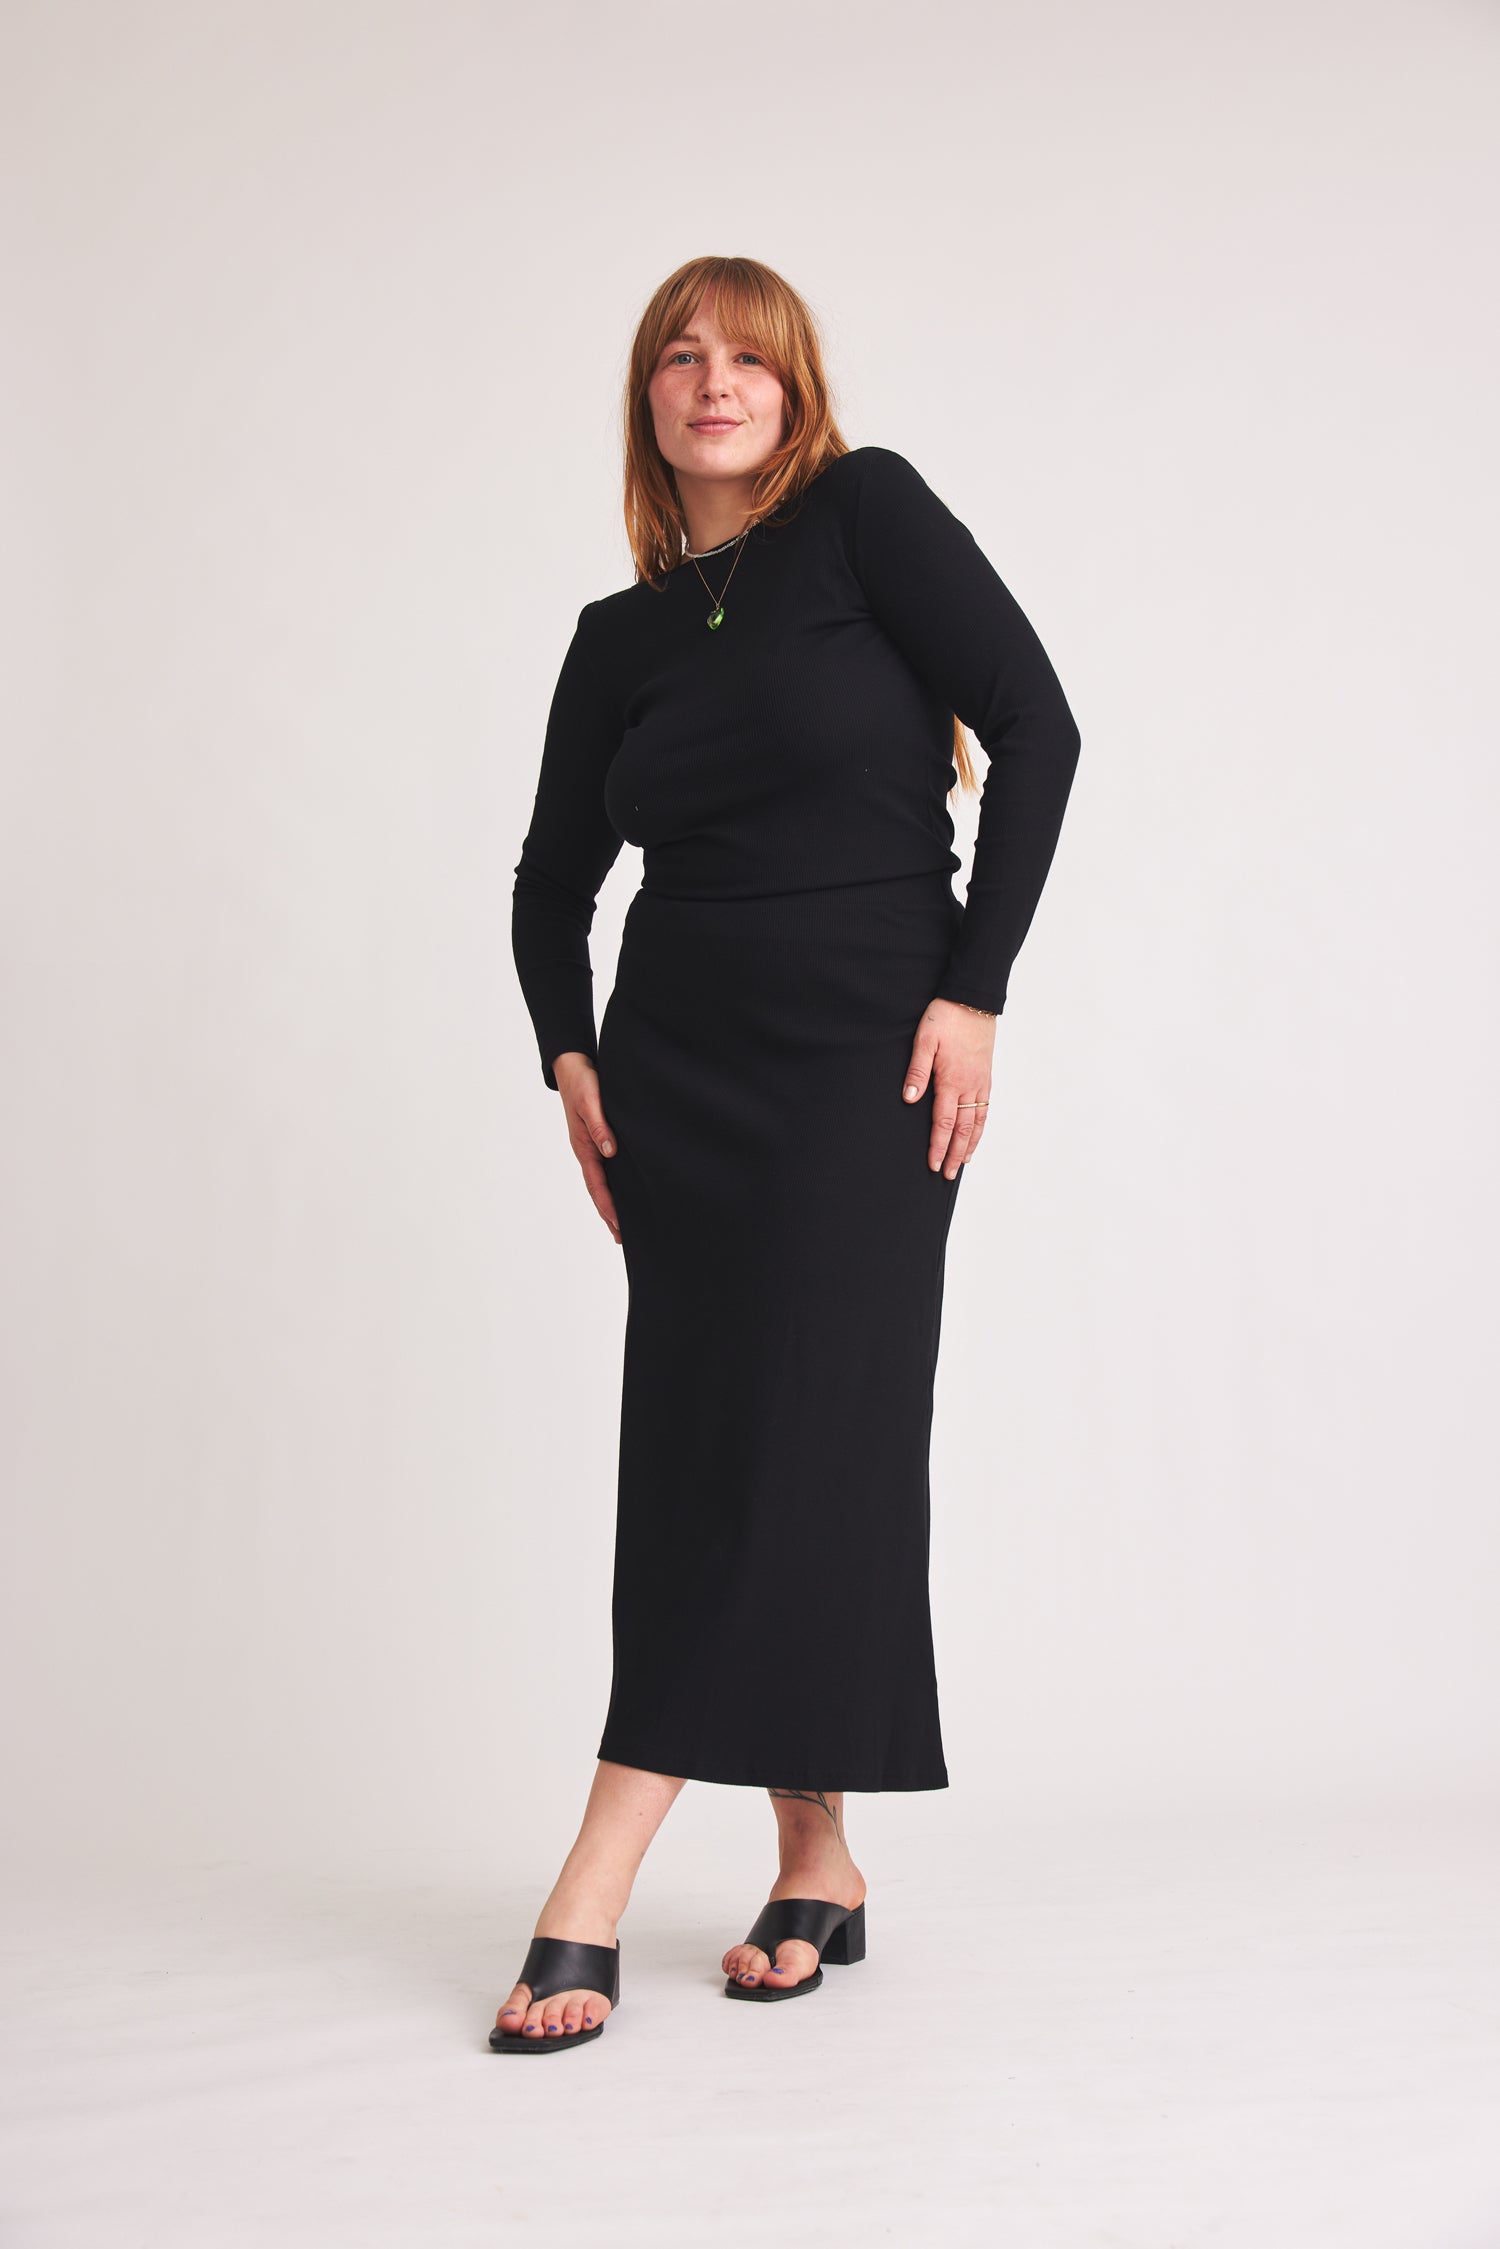 Black skirt Bastia made of organic cotton by Baige the Label